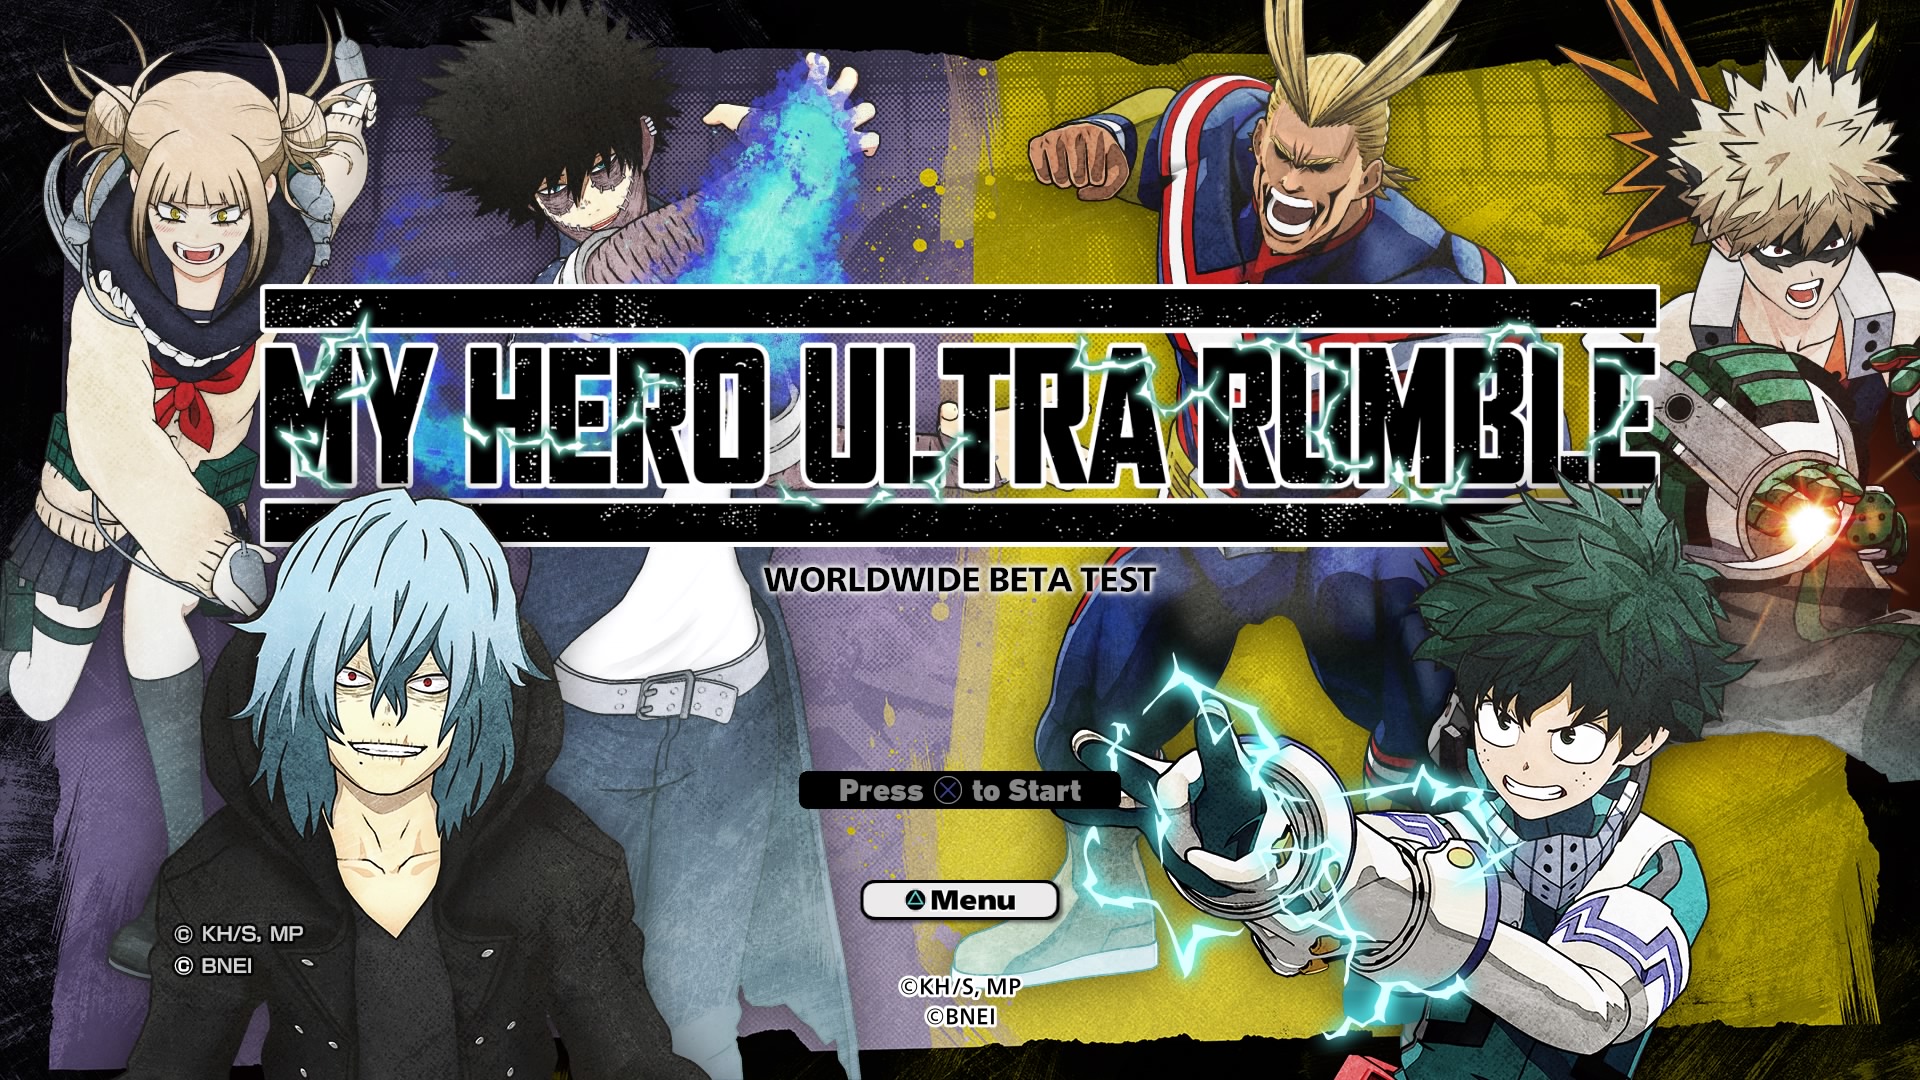 Bandai Namco Ent. to Release My Hero Ultra Rumble Game in English